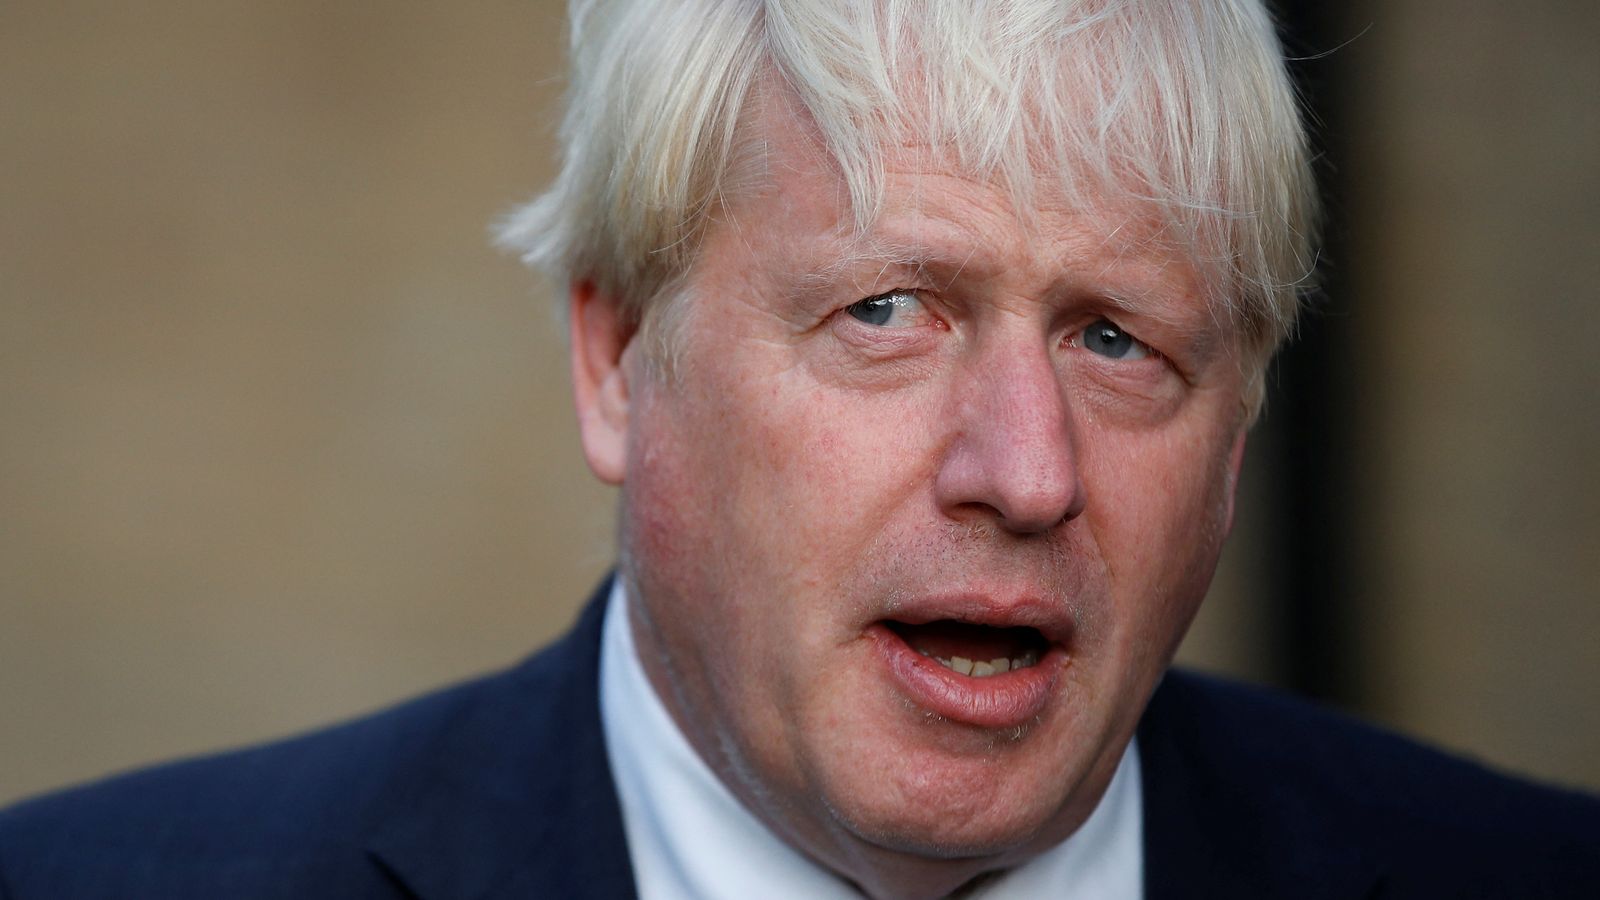 Labour reports Boris Johnson to standards watchdog over 'quagmire of sleaze' engulfing former PM